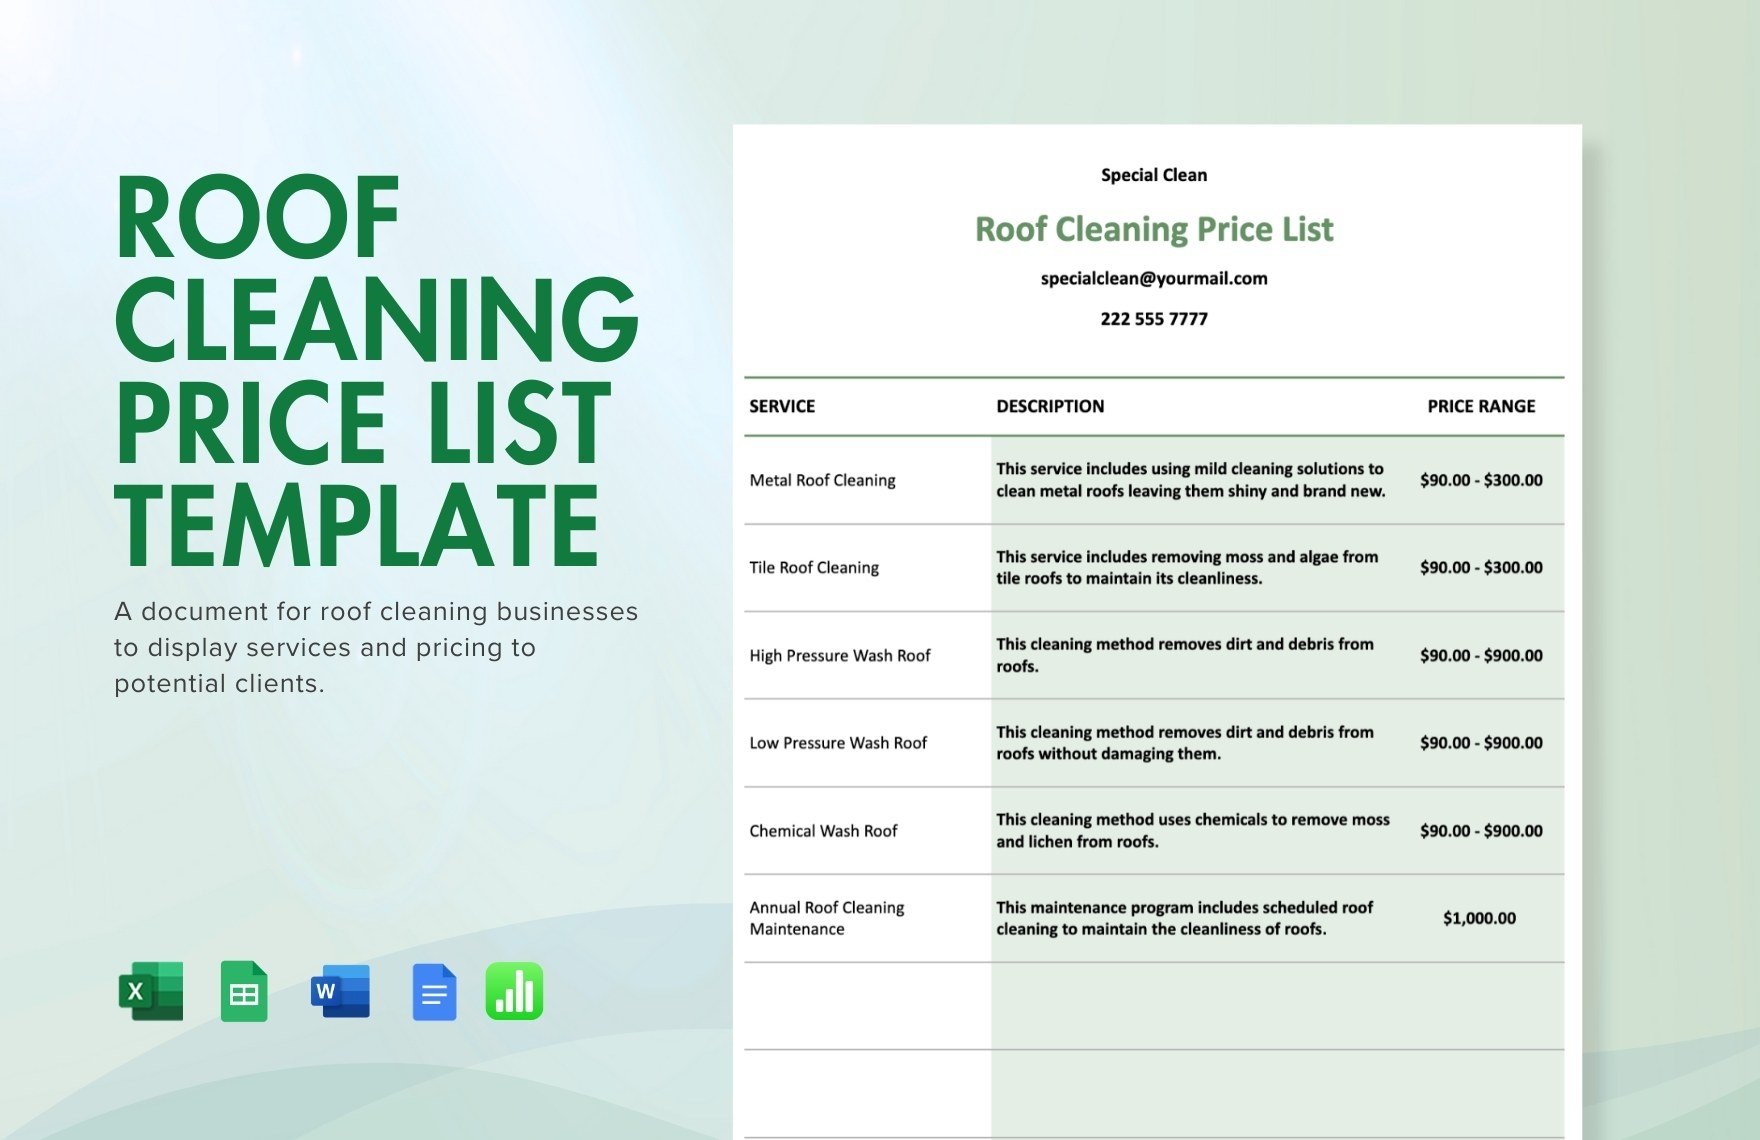 Free Roof Cleaning Price List Template in Word, Google Docs, Excel, Google Sheets, Apple Numbers